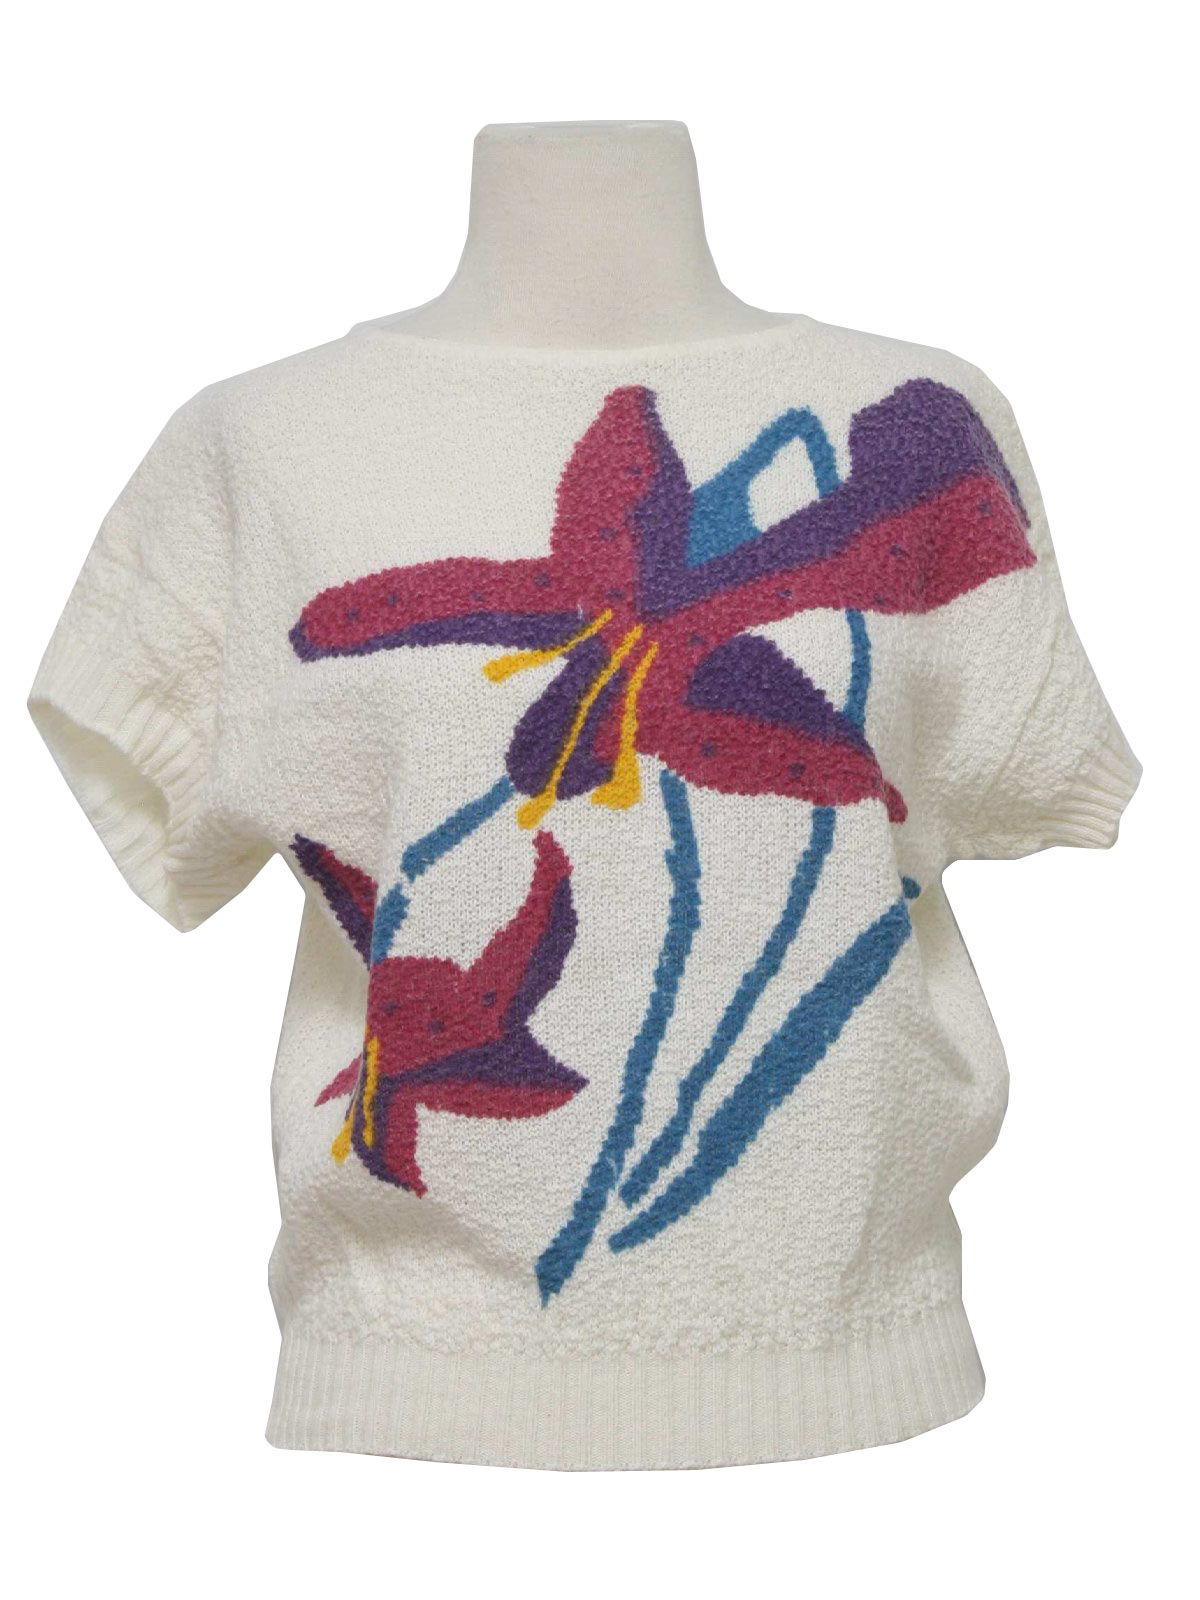 Retro Eighties Sweater: 80s -Home Sewn- Womens off white, pullover ...